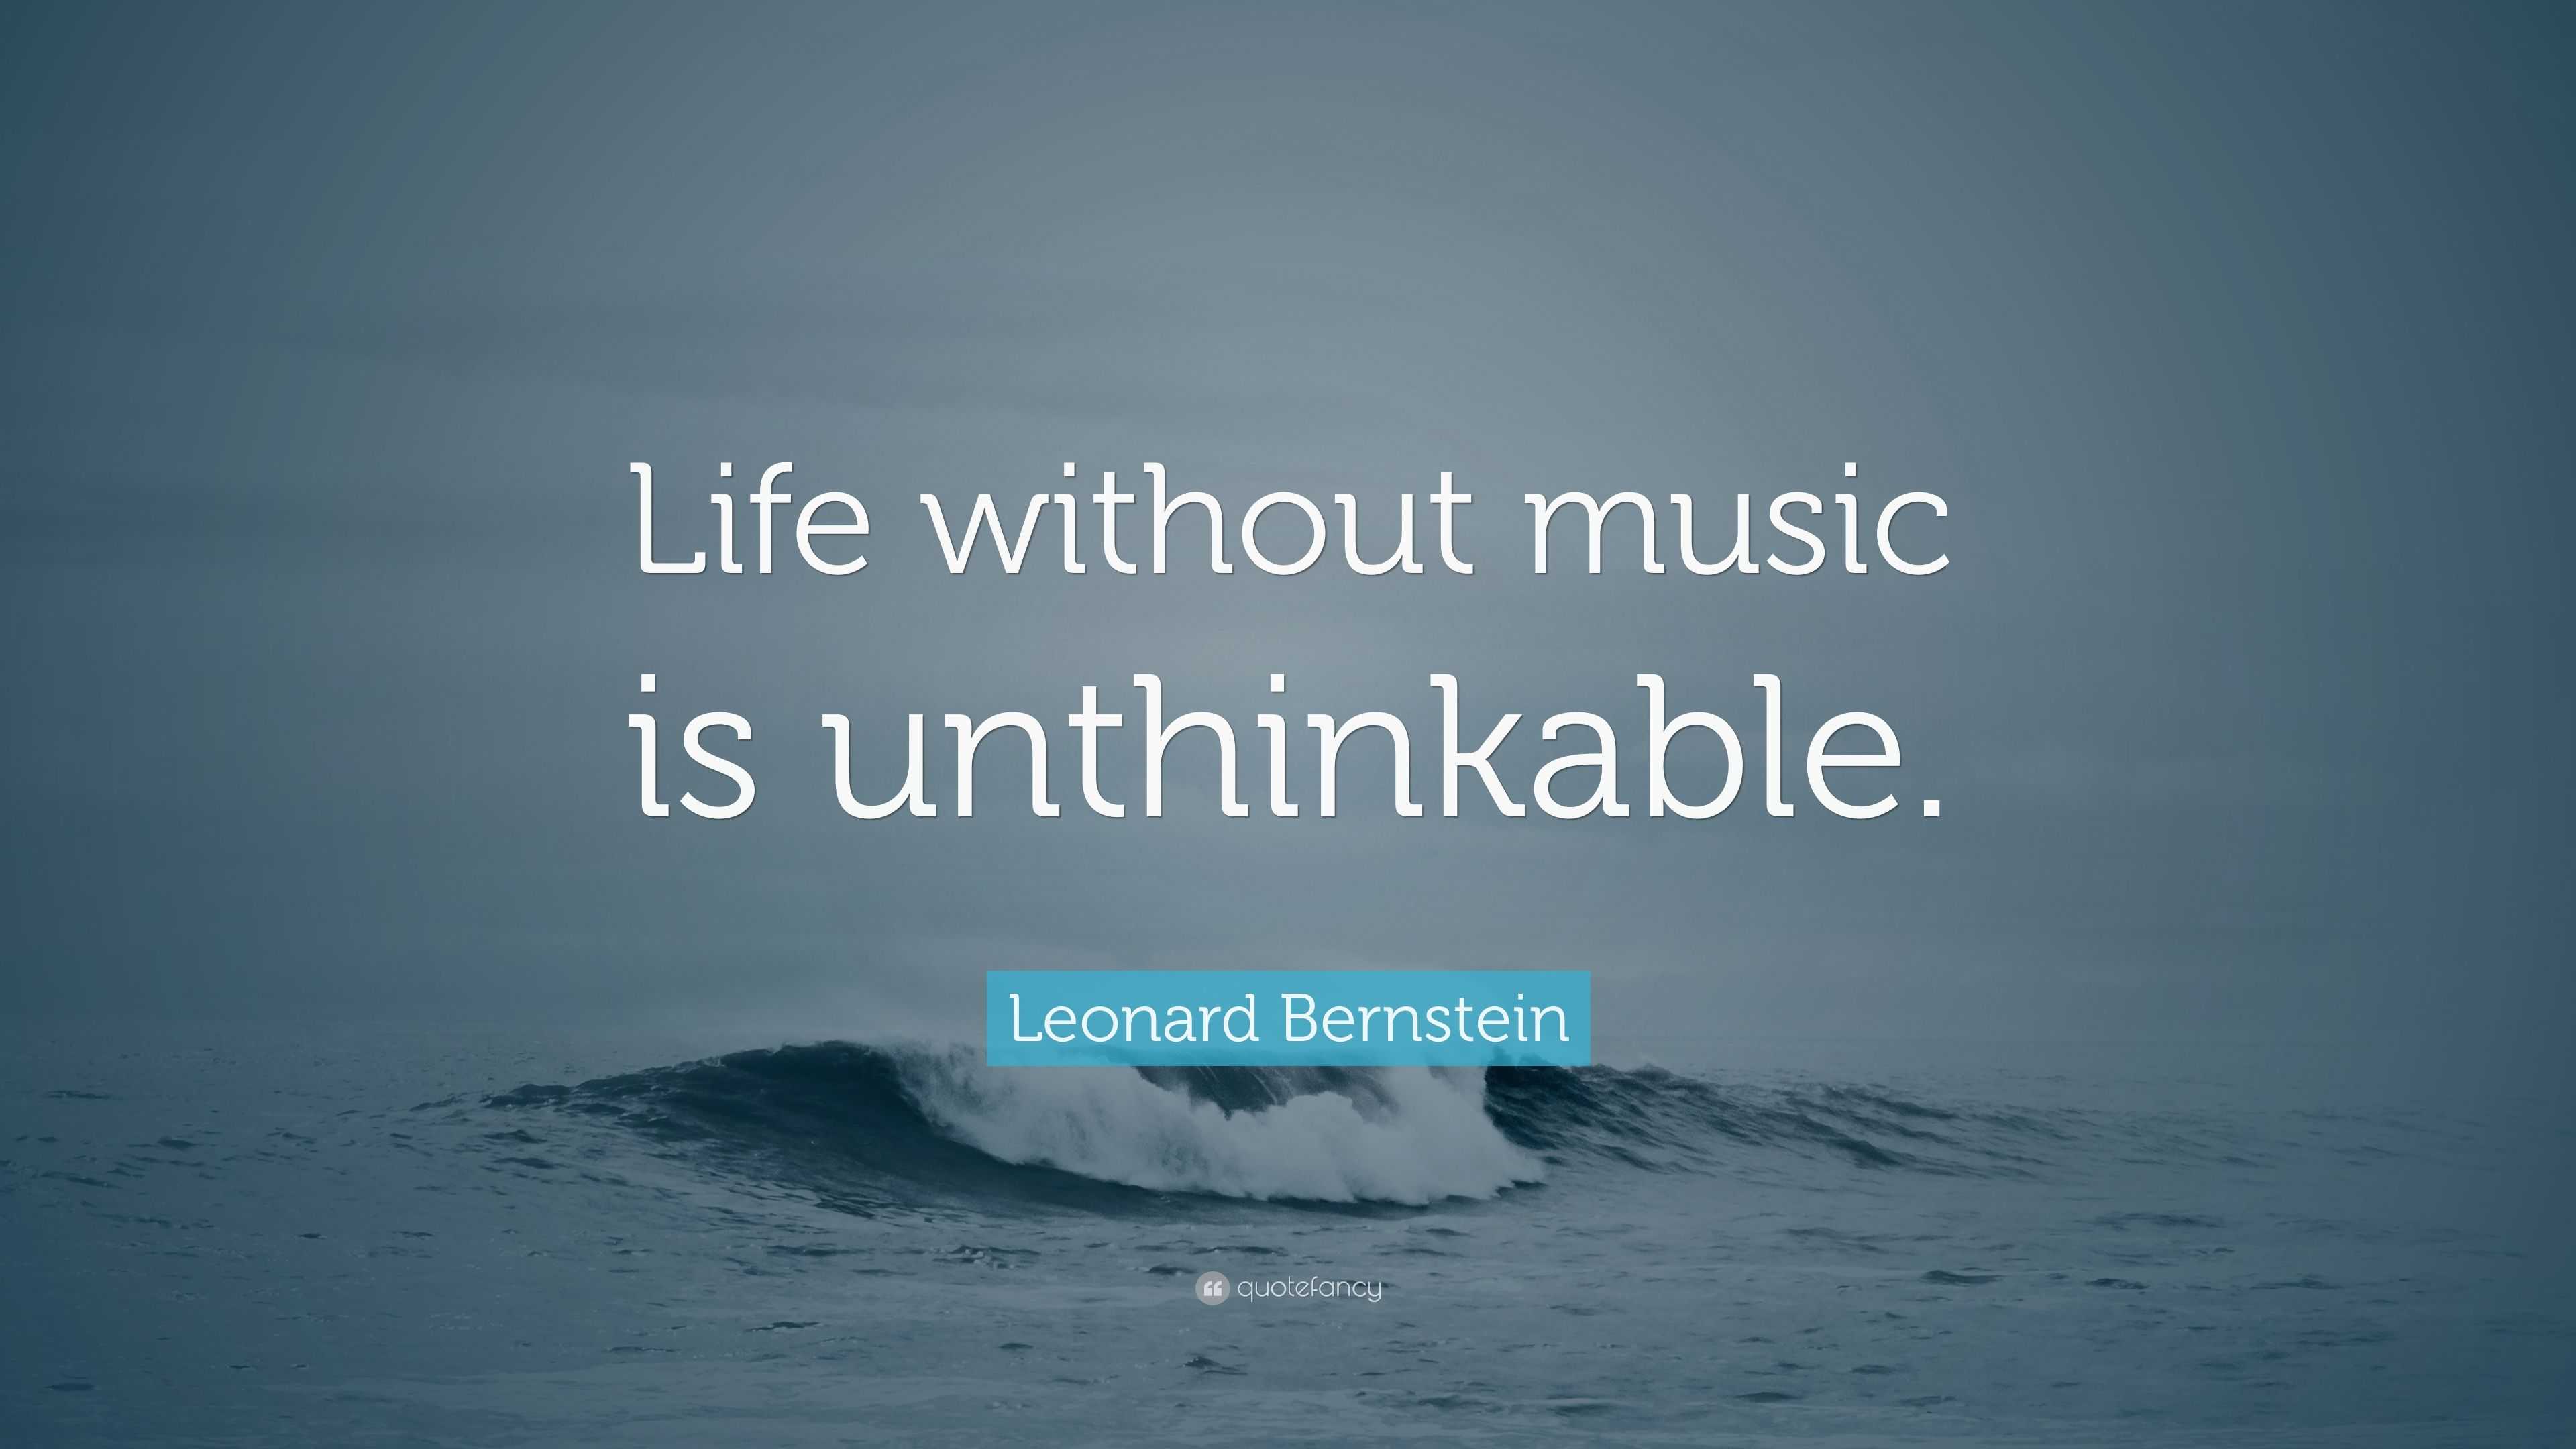 life without music quotes leonard bernstein quote u201clife without music is unthinkable u201d 9